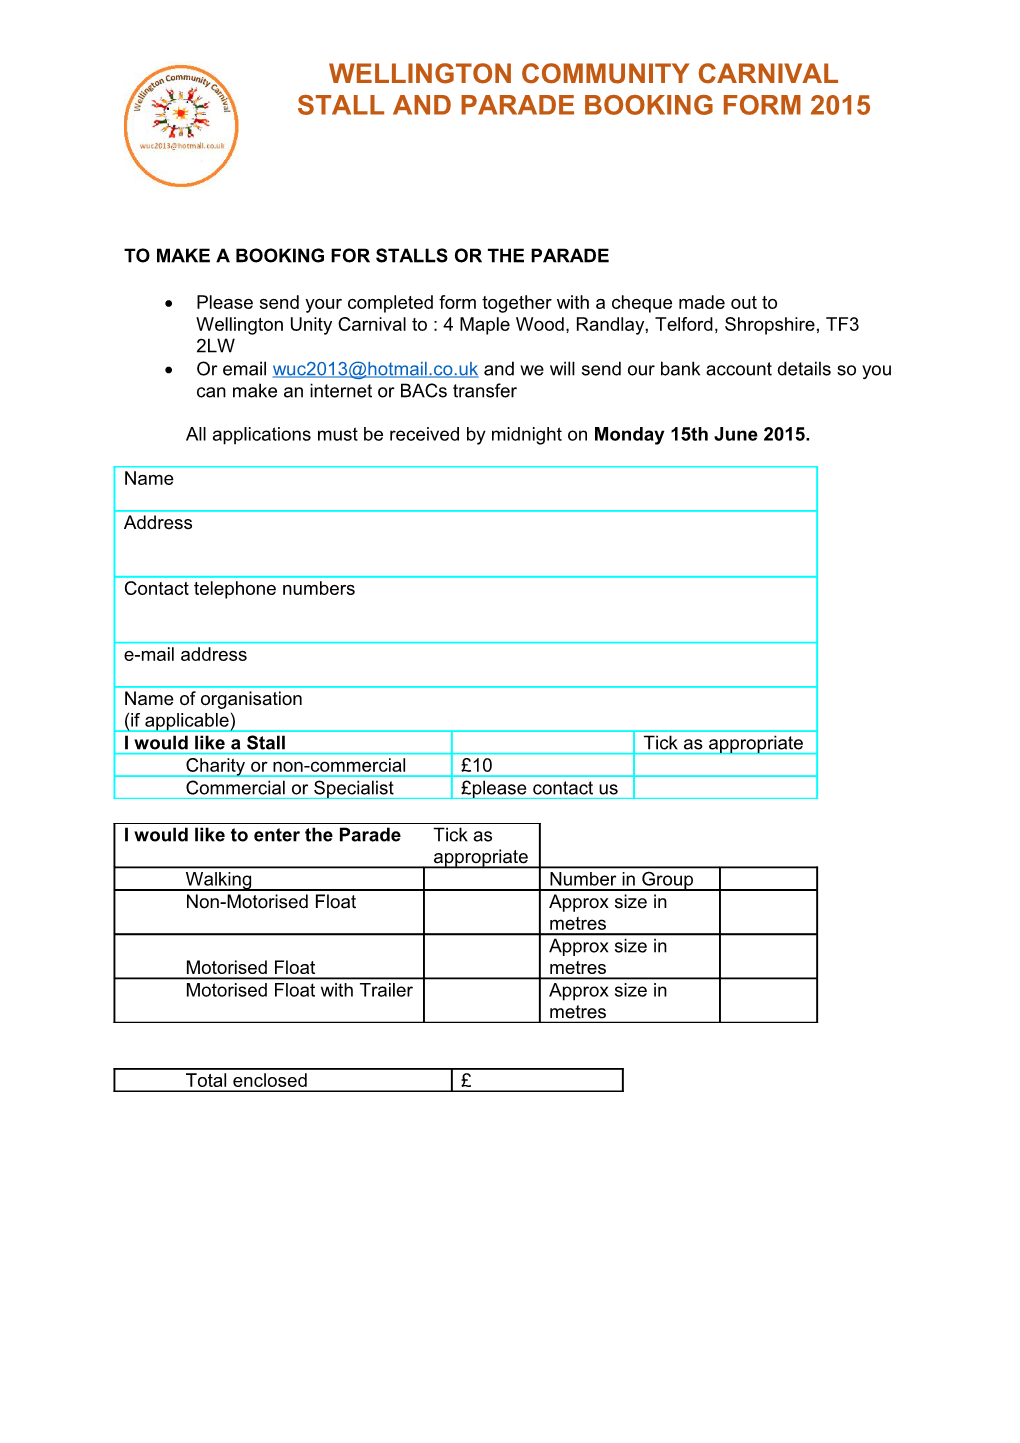 Wellington Carnival Booking Form 2013-03-14